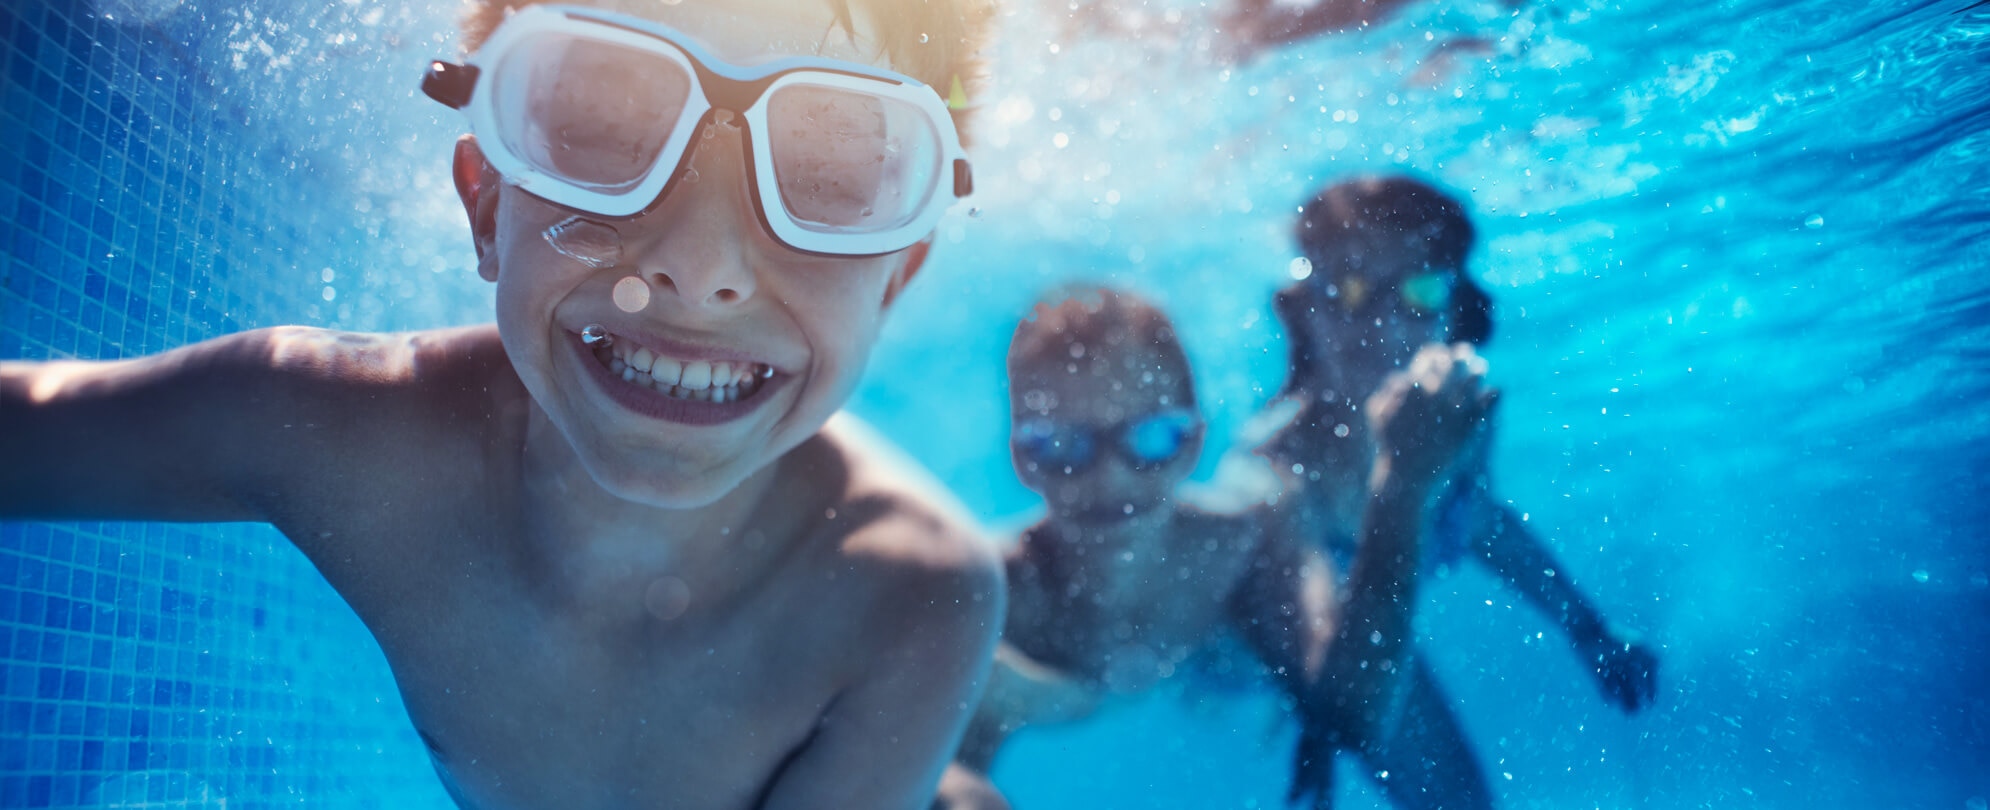 young boy wearing goggles smiling underwater 